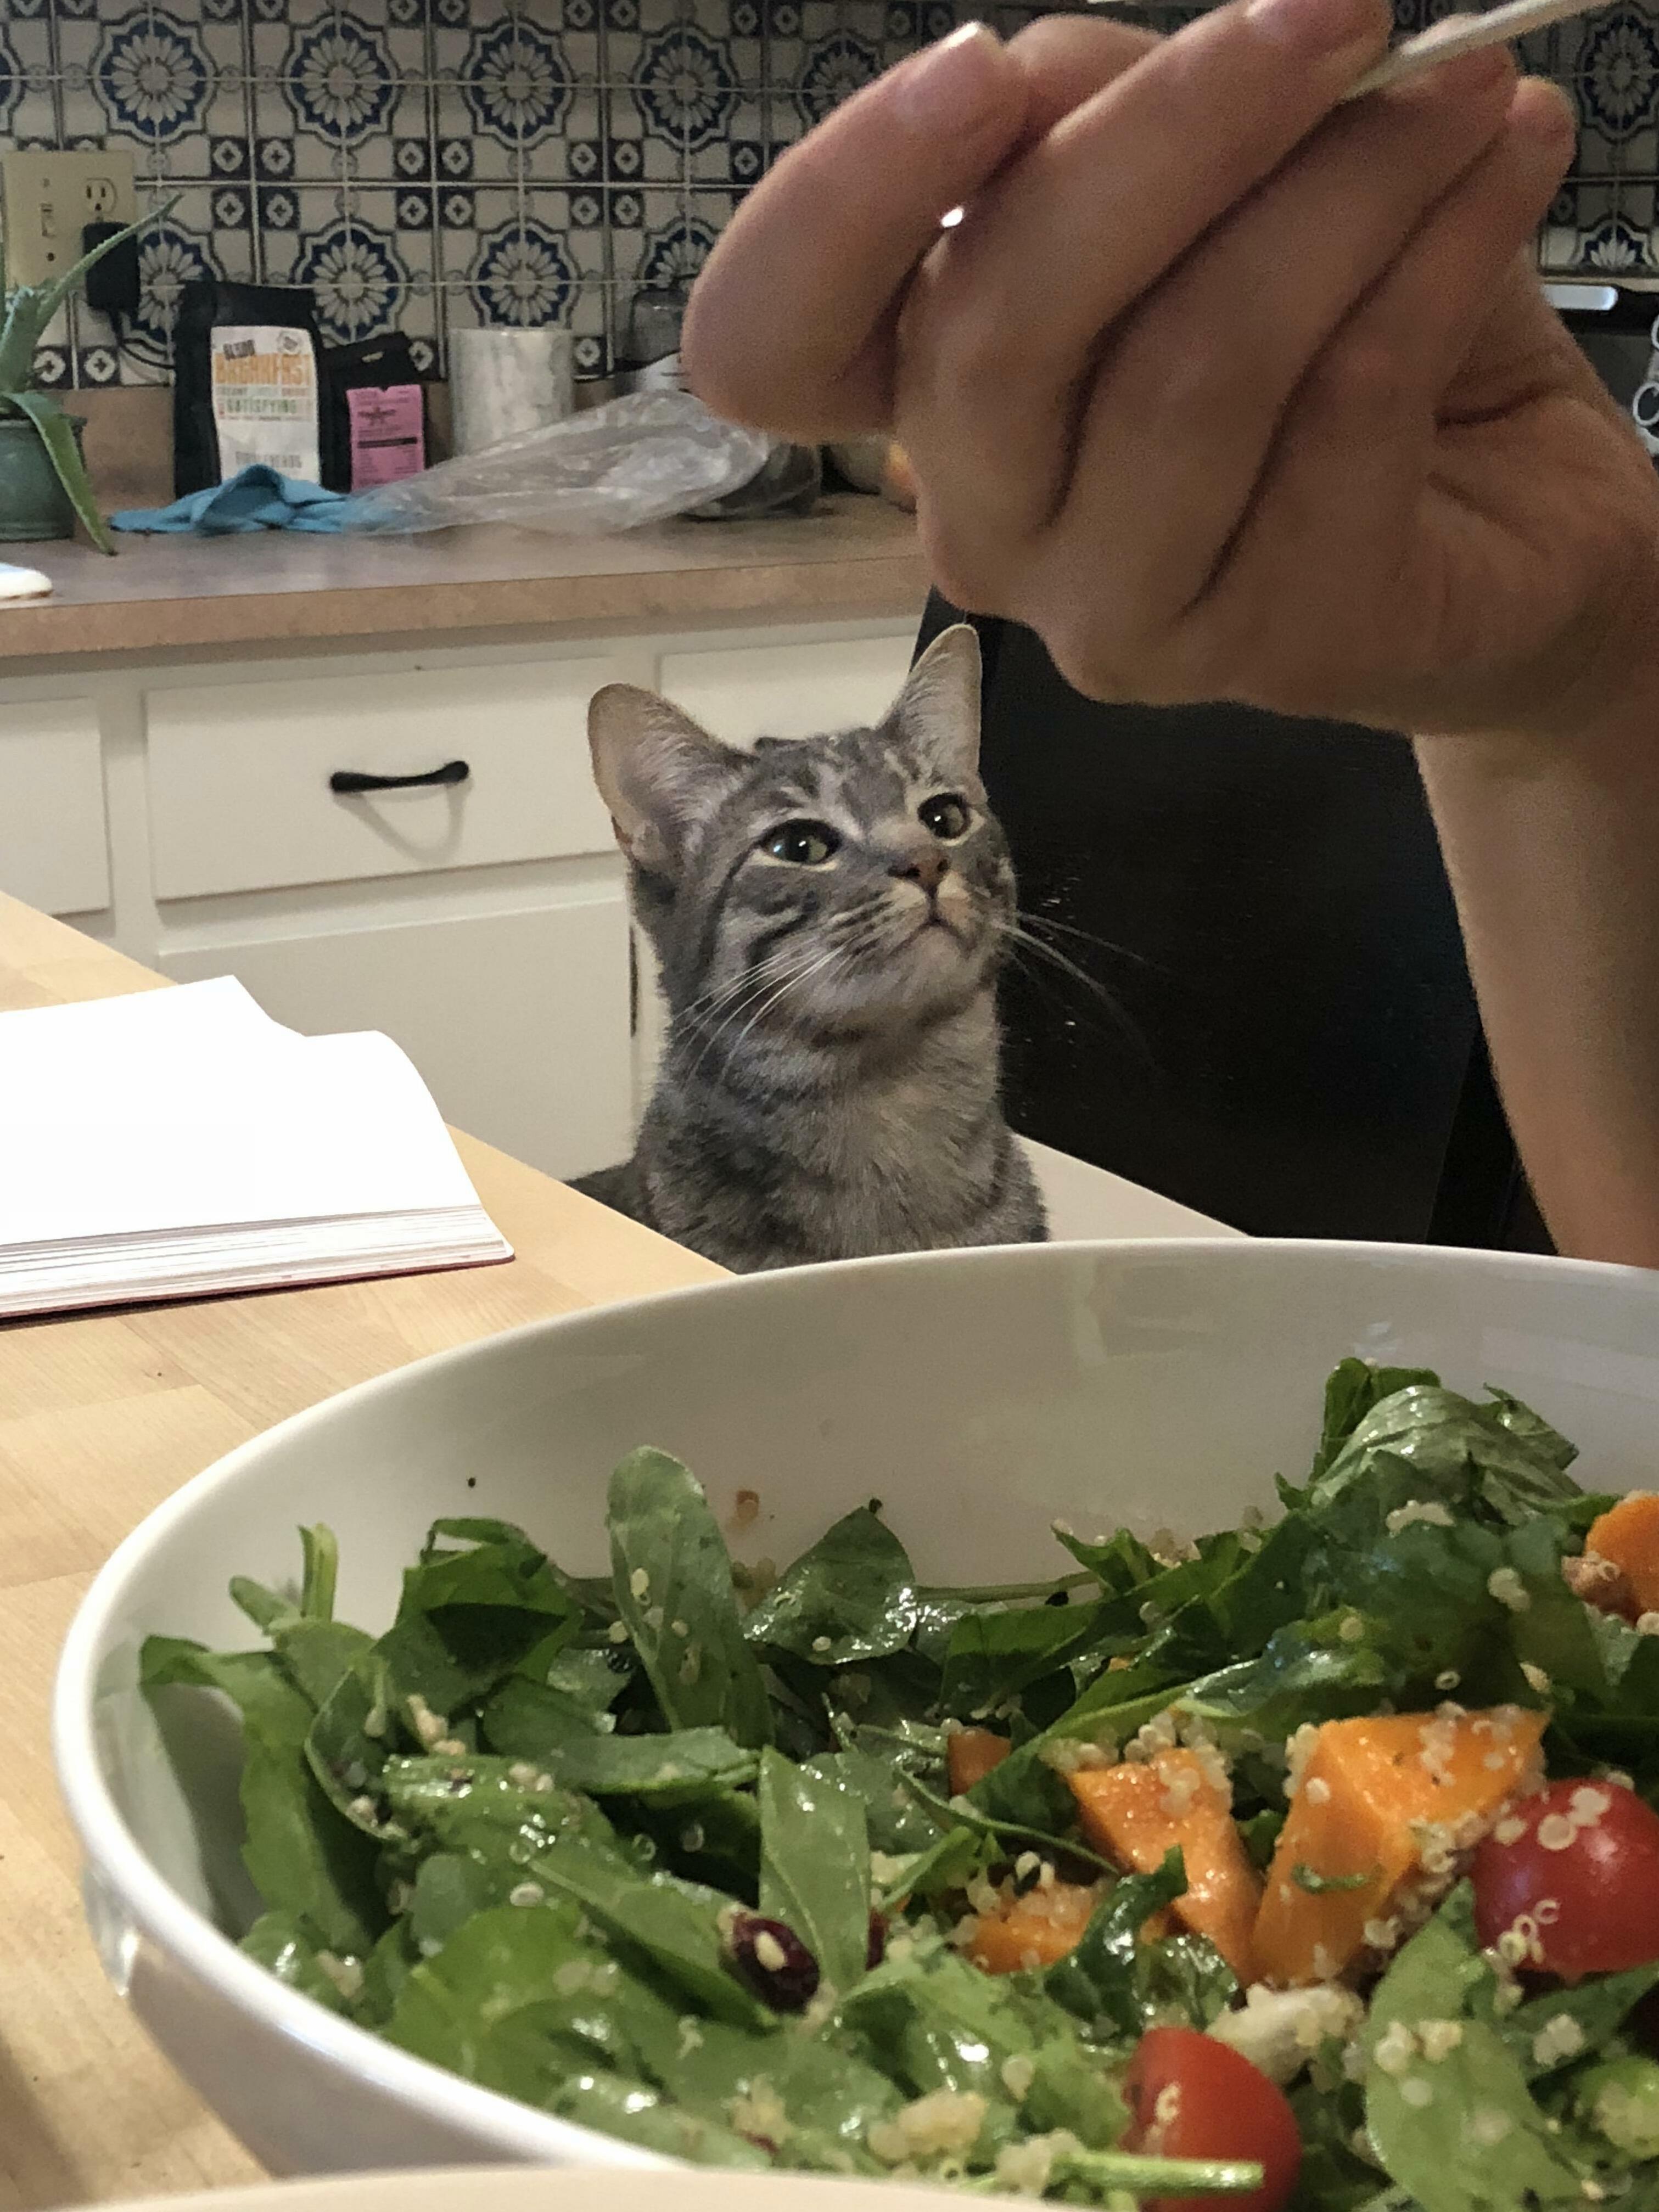 Can i have some